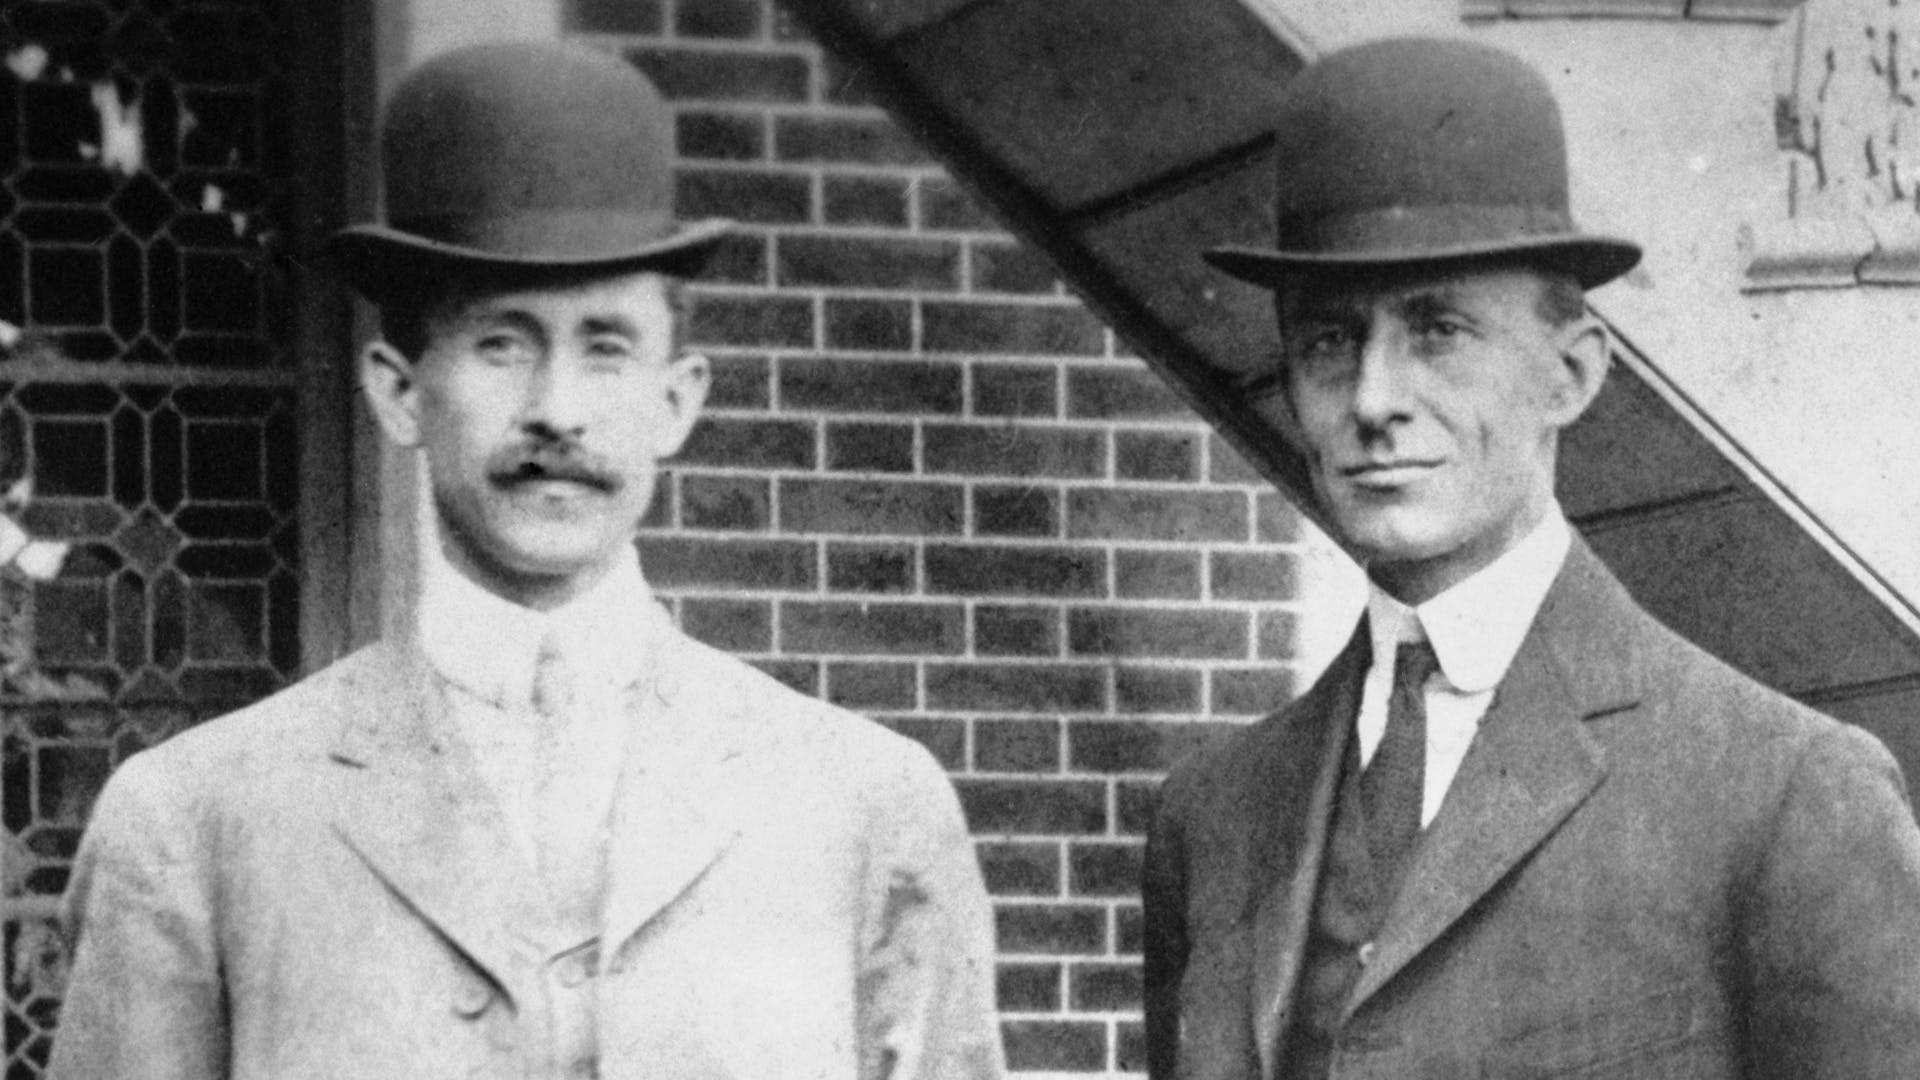 Orville and Wilbur Wright: The Brothers Who Changed Aviation